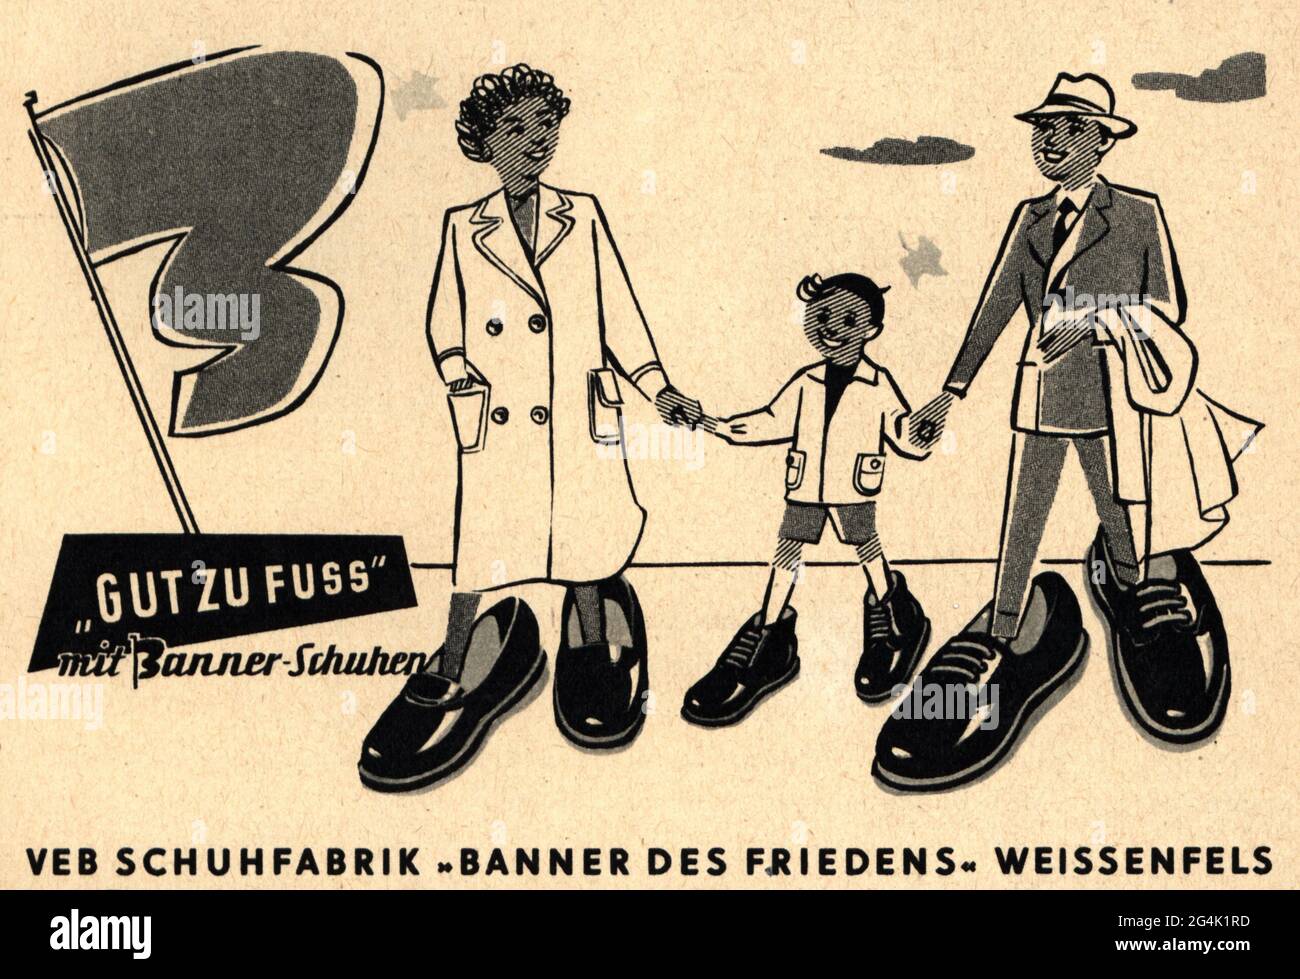 advertising, shoes, Banner-Schuhe, VEB Schuhfabrik 'Banner des Friedens', Weissenfels, advertisement, ADDITIONAL-RIGHTS-CLEARANCE-INFO-NOT-AVAILABLE Stock Photo